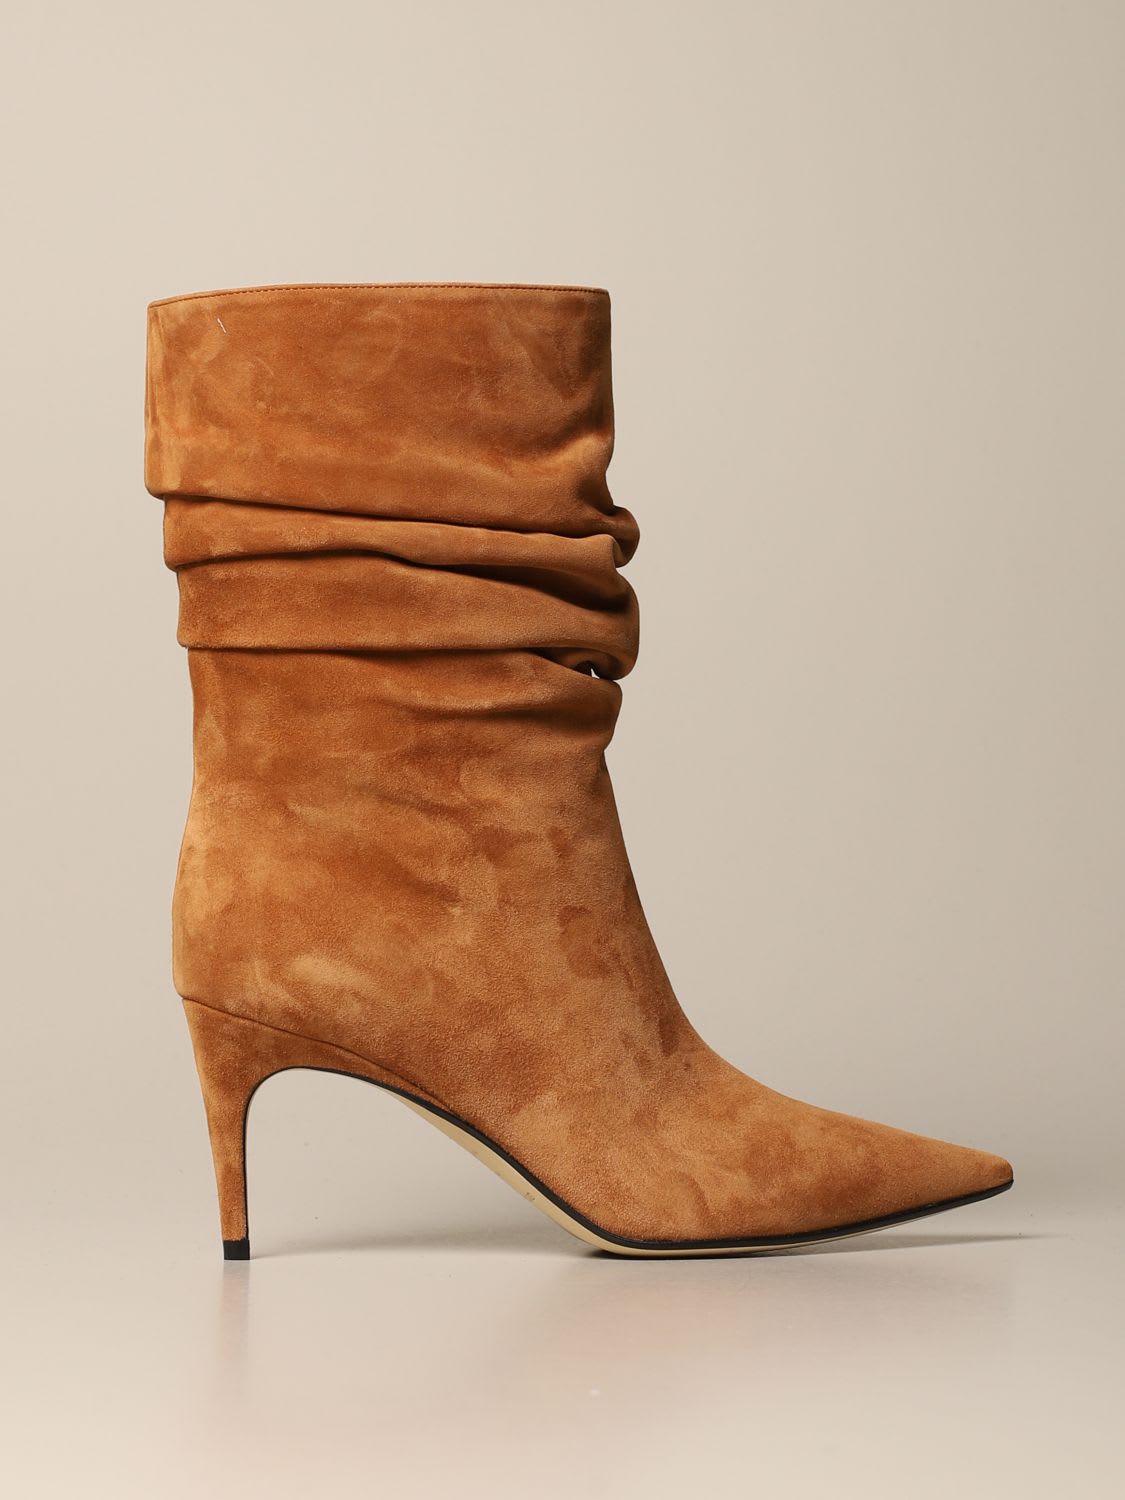 Buy Sergio Rossi Flat Booties Sergio Rossi Ankle Boot In Suede online, shop Sergio Rossi shoes with free shipping